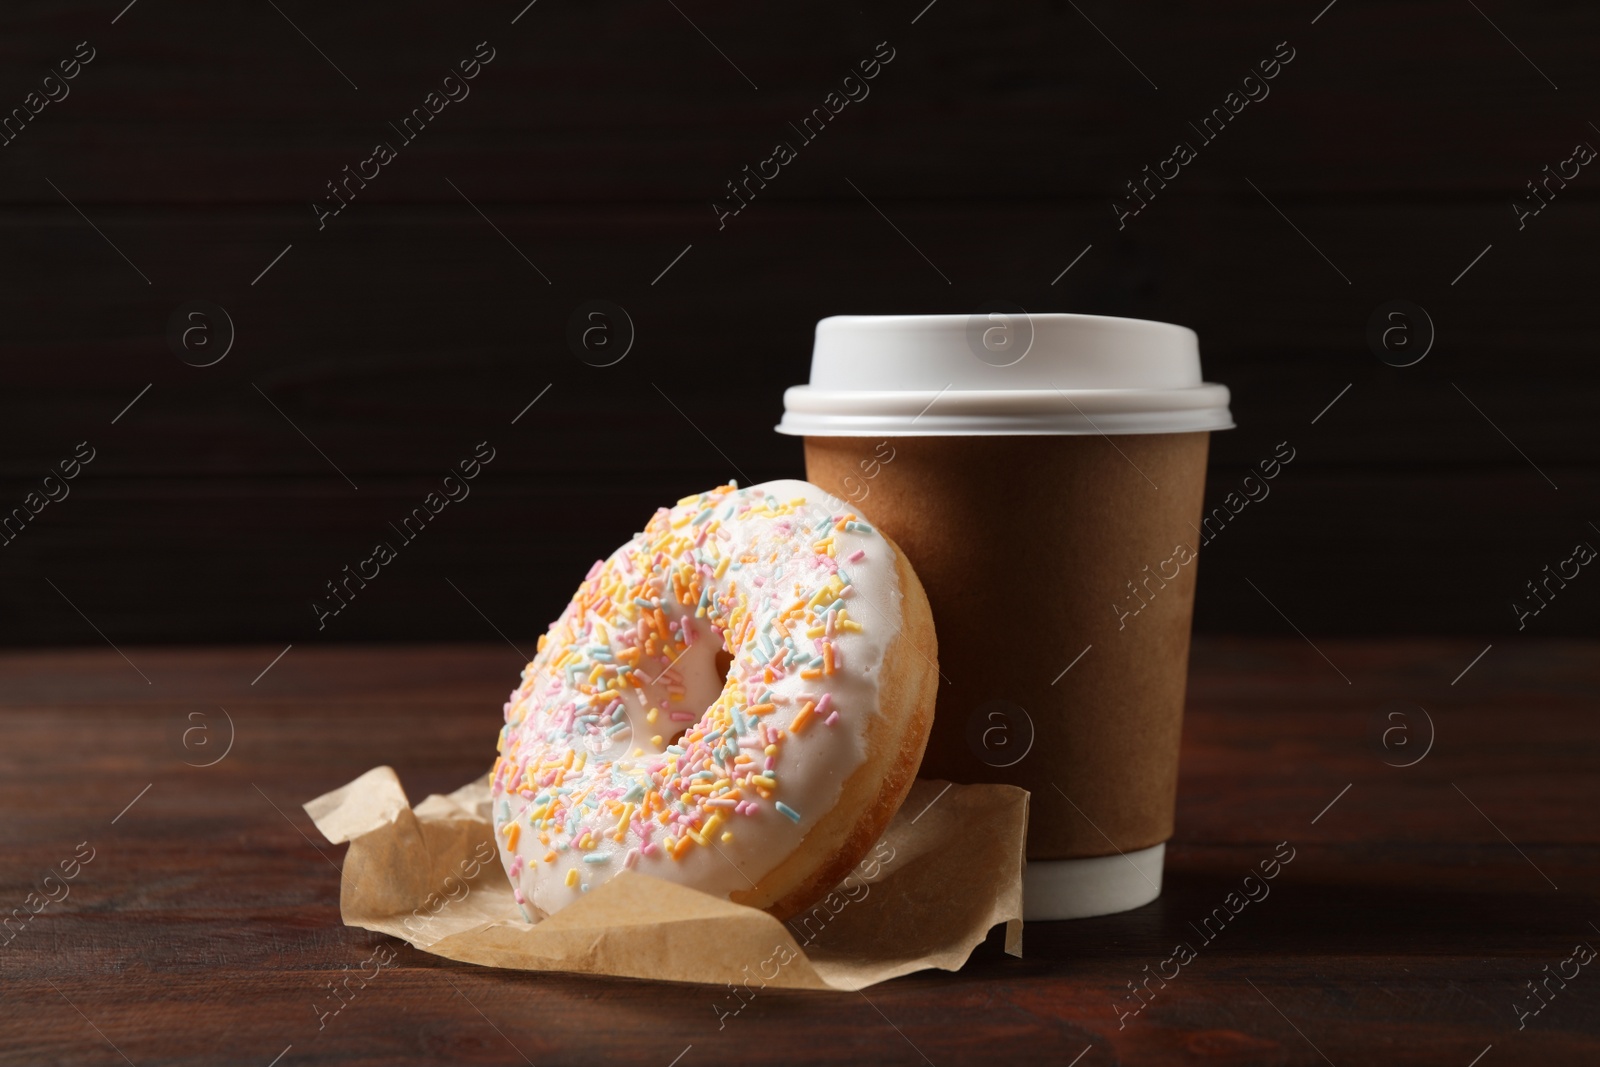 Photo of Yummy donut and paper cup on wooden table against brown background